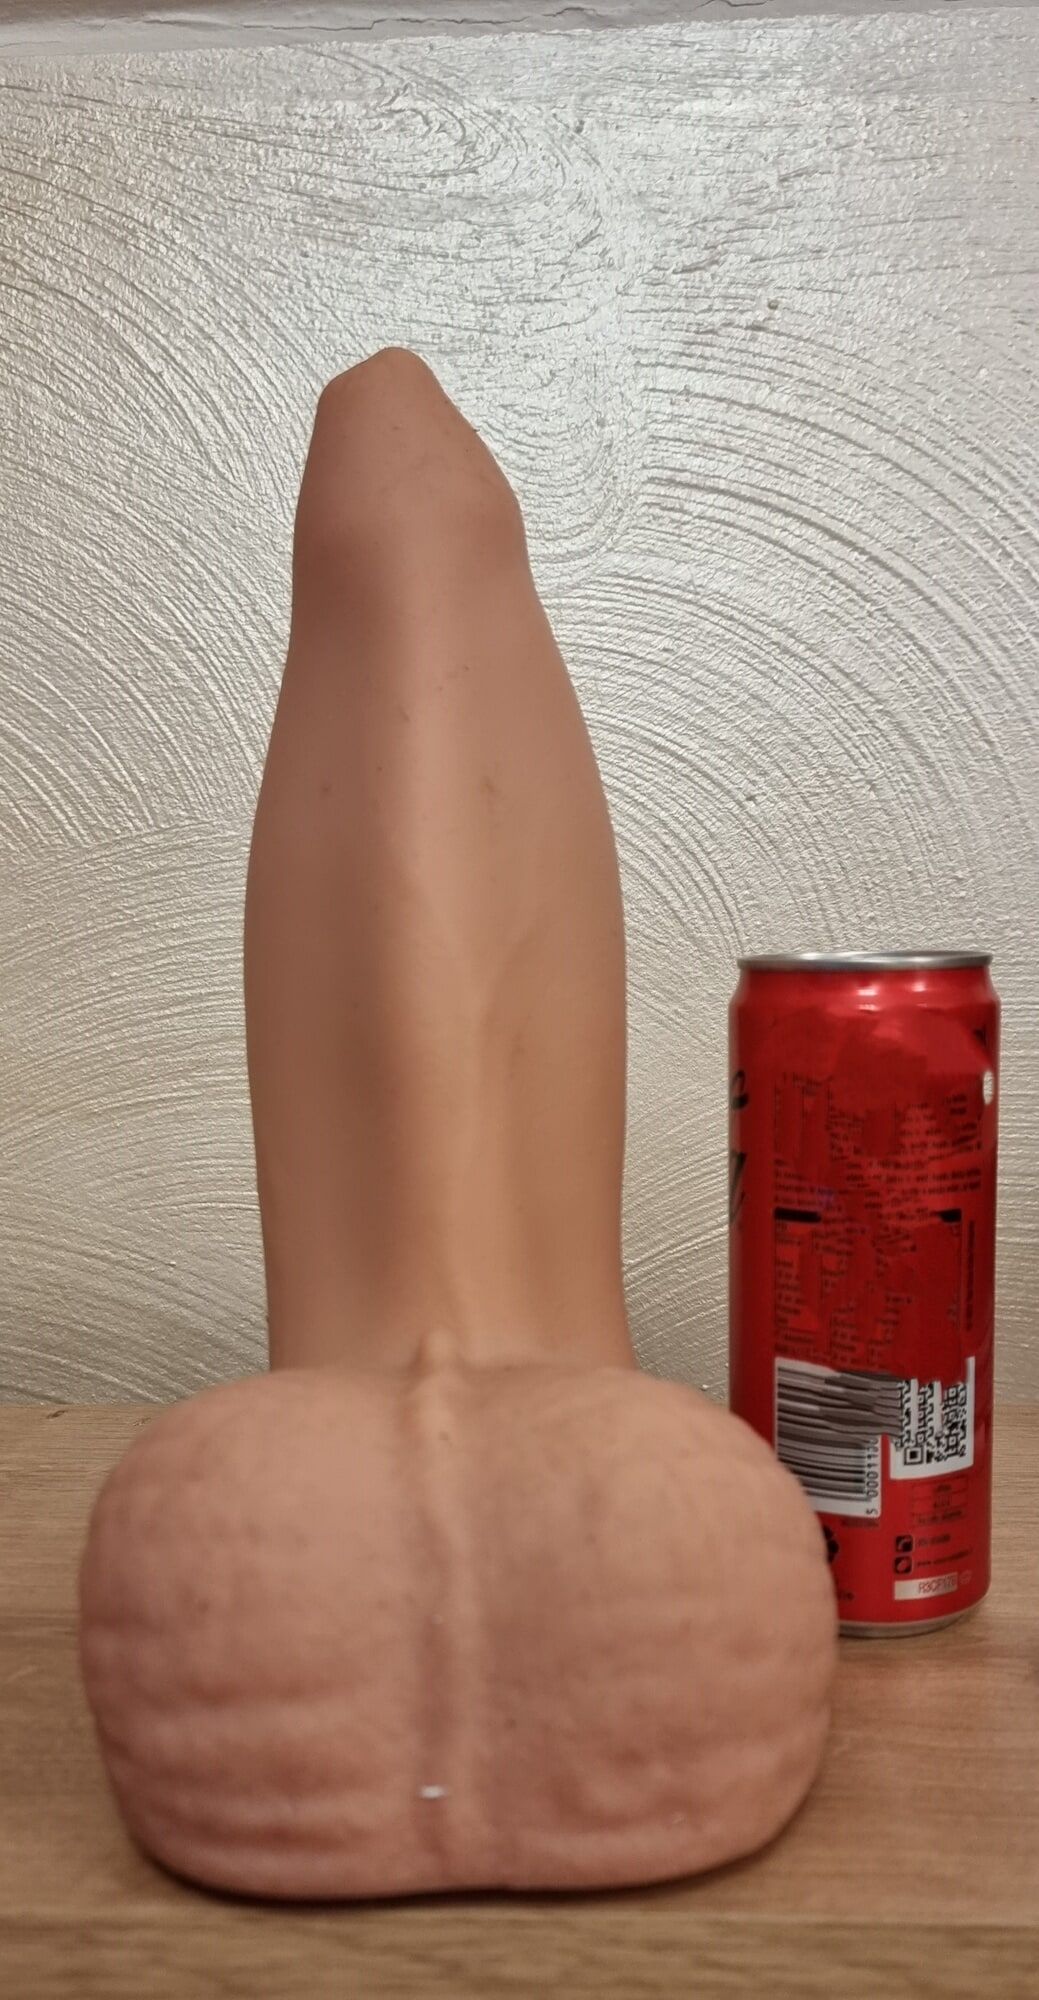 New huge dildos forr my asshole: THE NEXT LEVEL OF GAPE1 #13